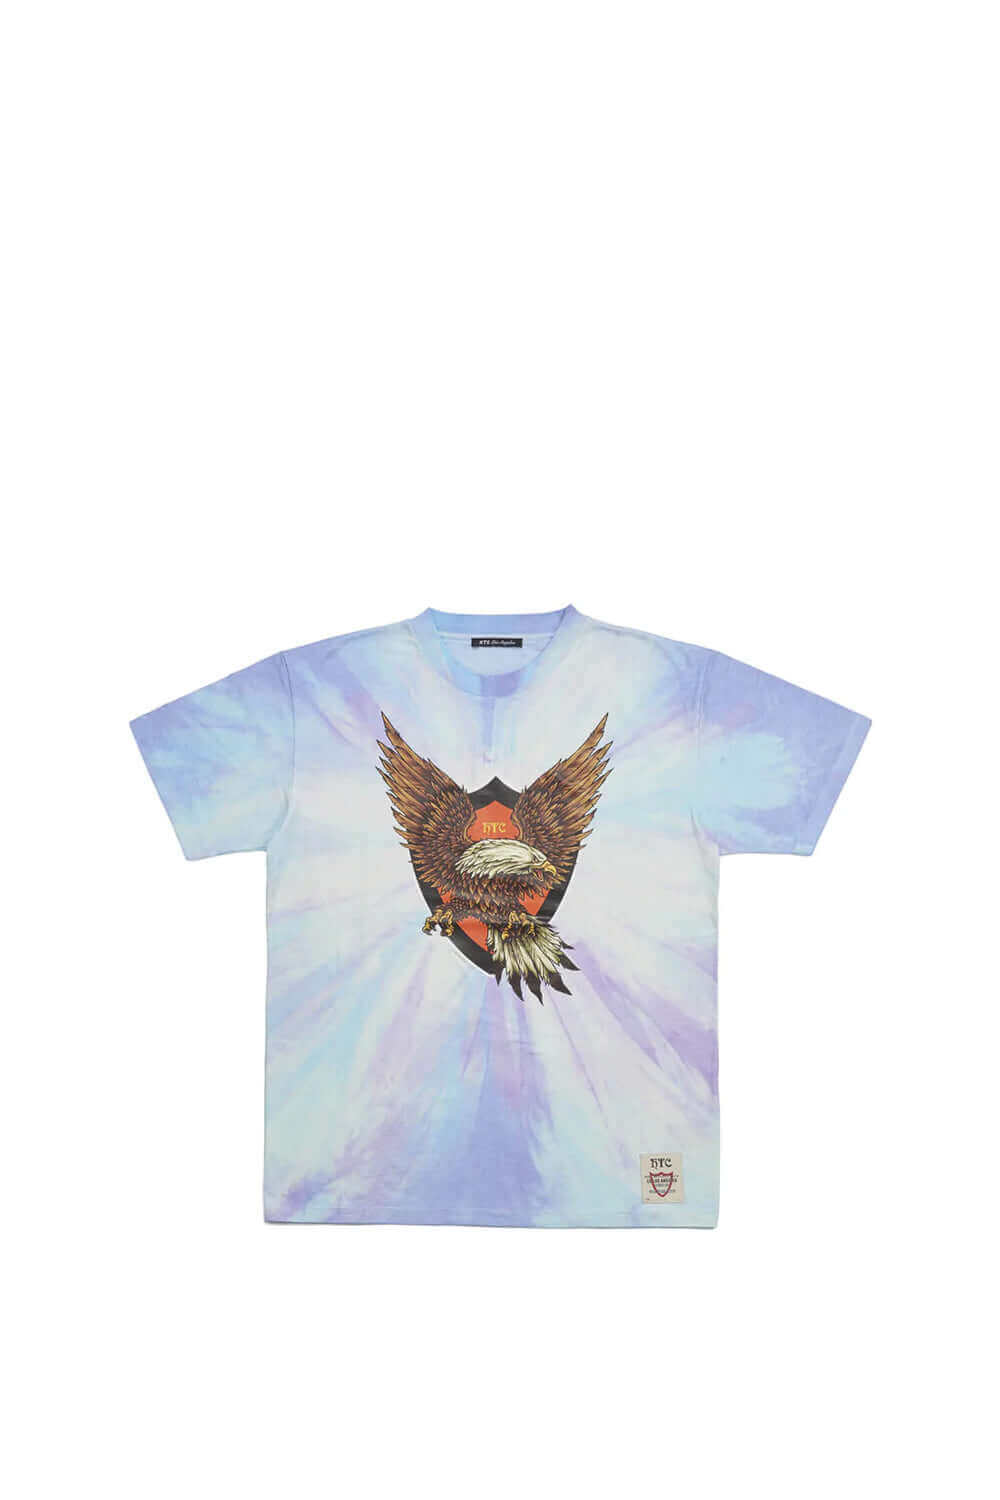 TIE DYE EAGLE T-SHIRT Light blue tie-dye t-shirt with front print. 100% cotton. Made in Italy. HTC LOS ANGELES